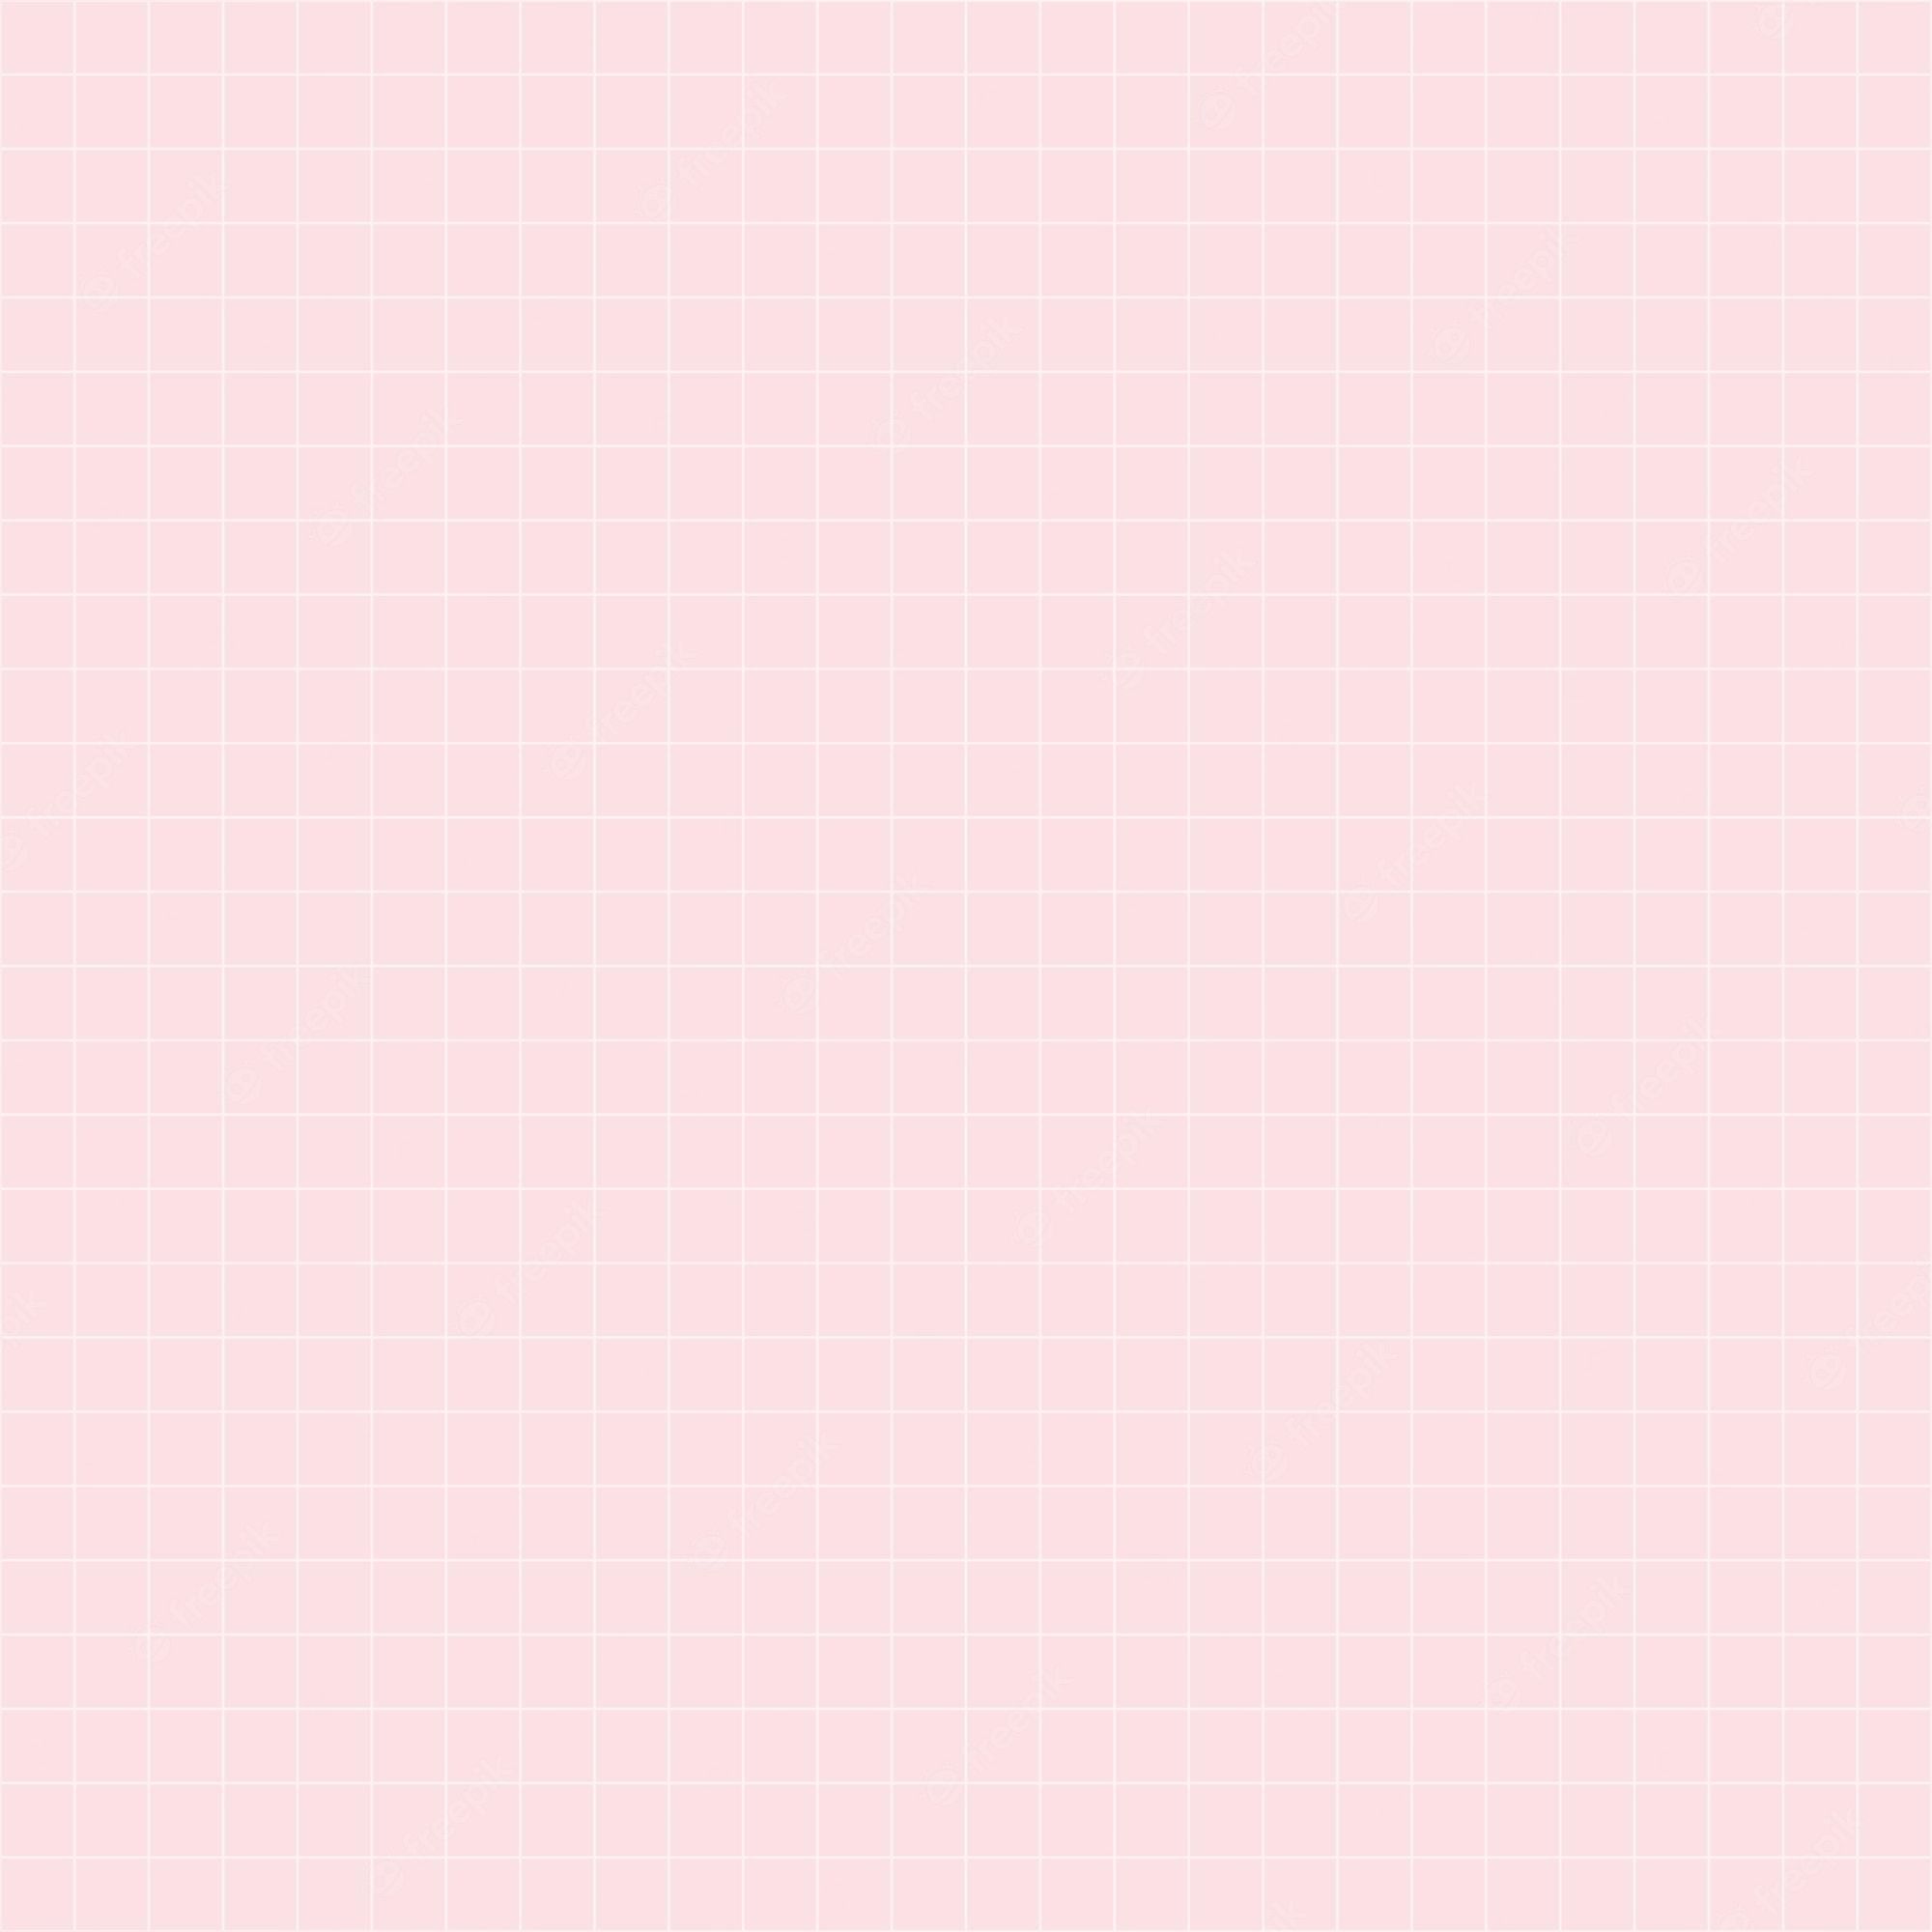 A pink background with white squares - Grid